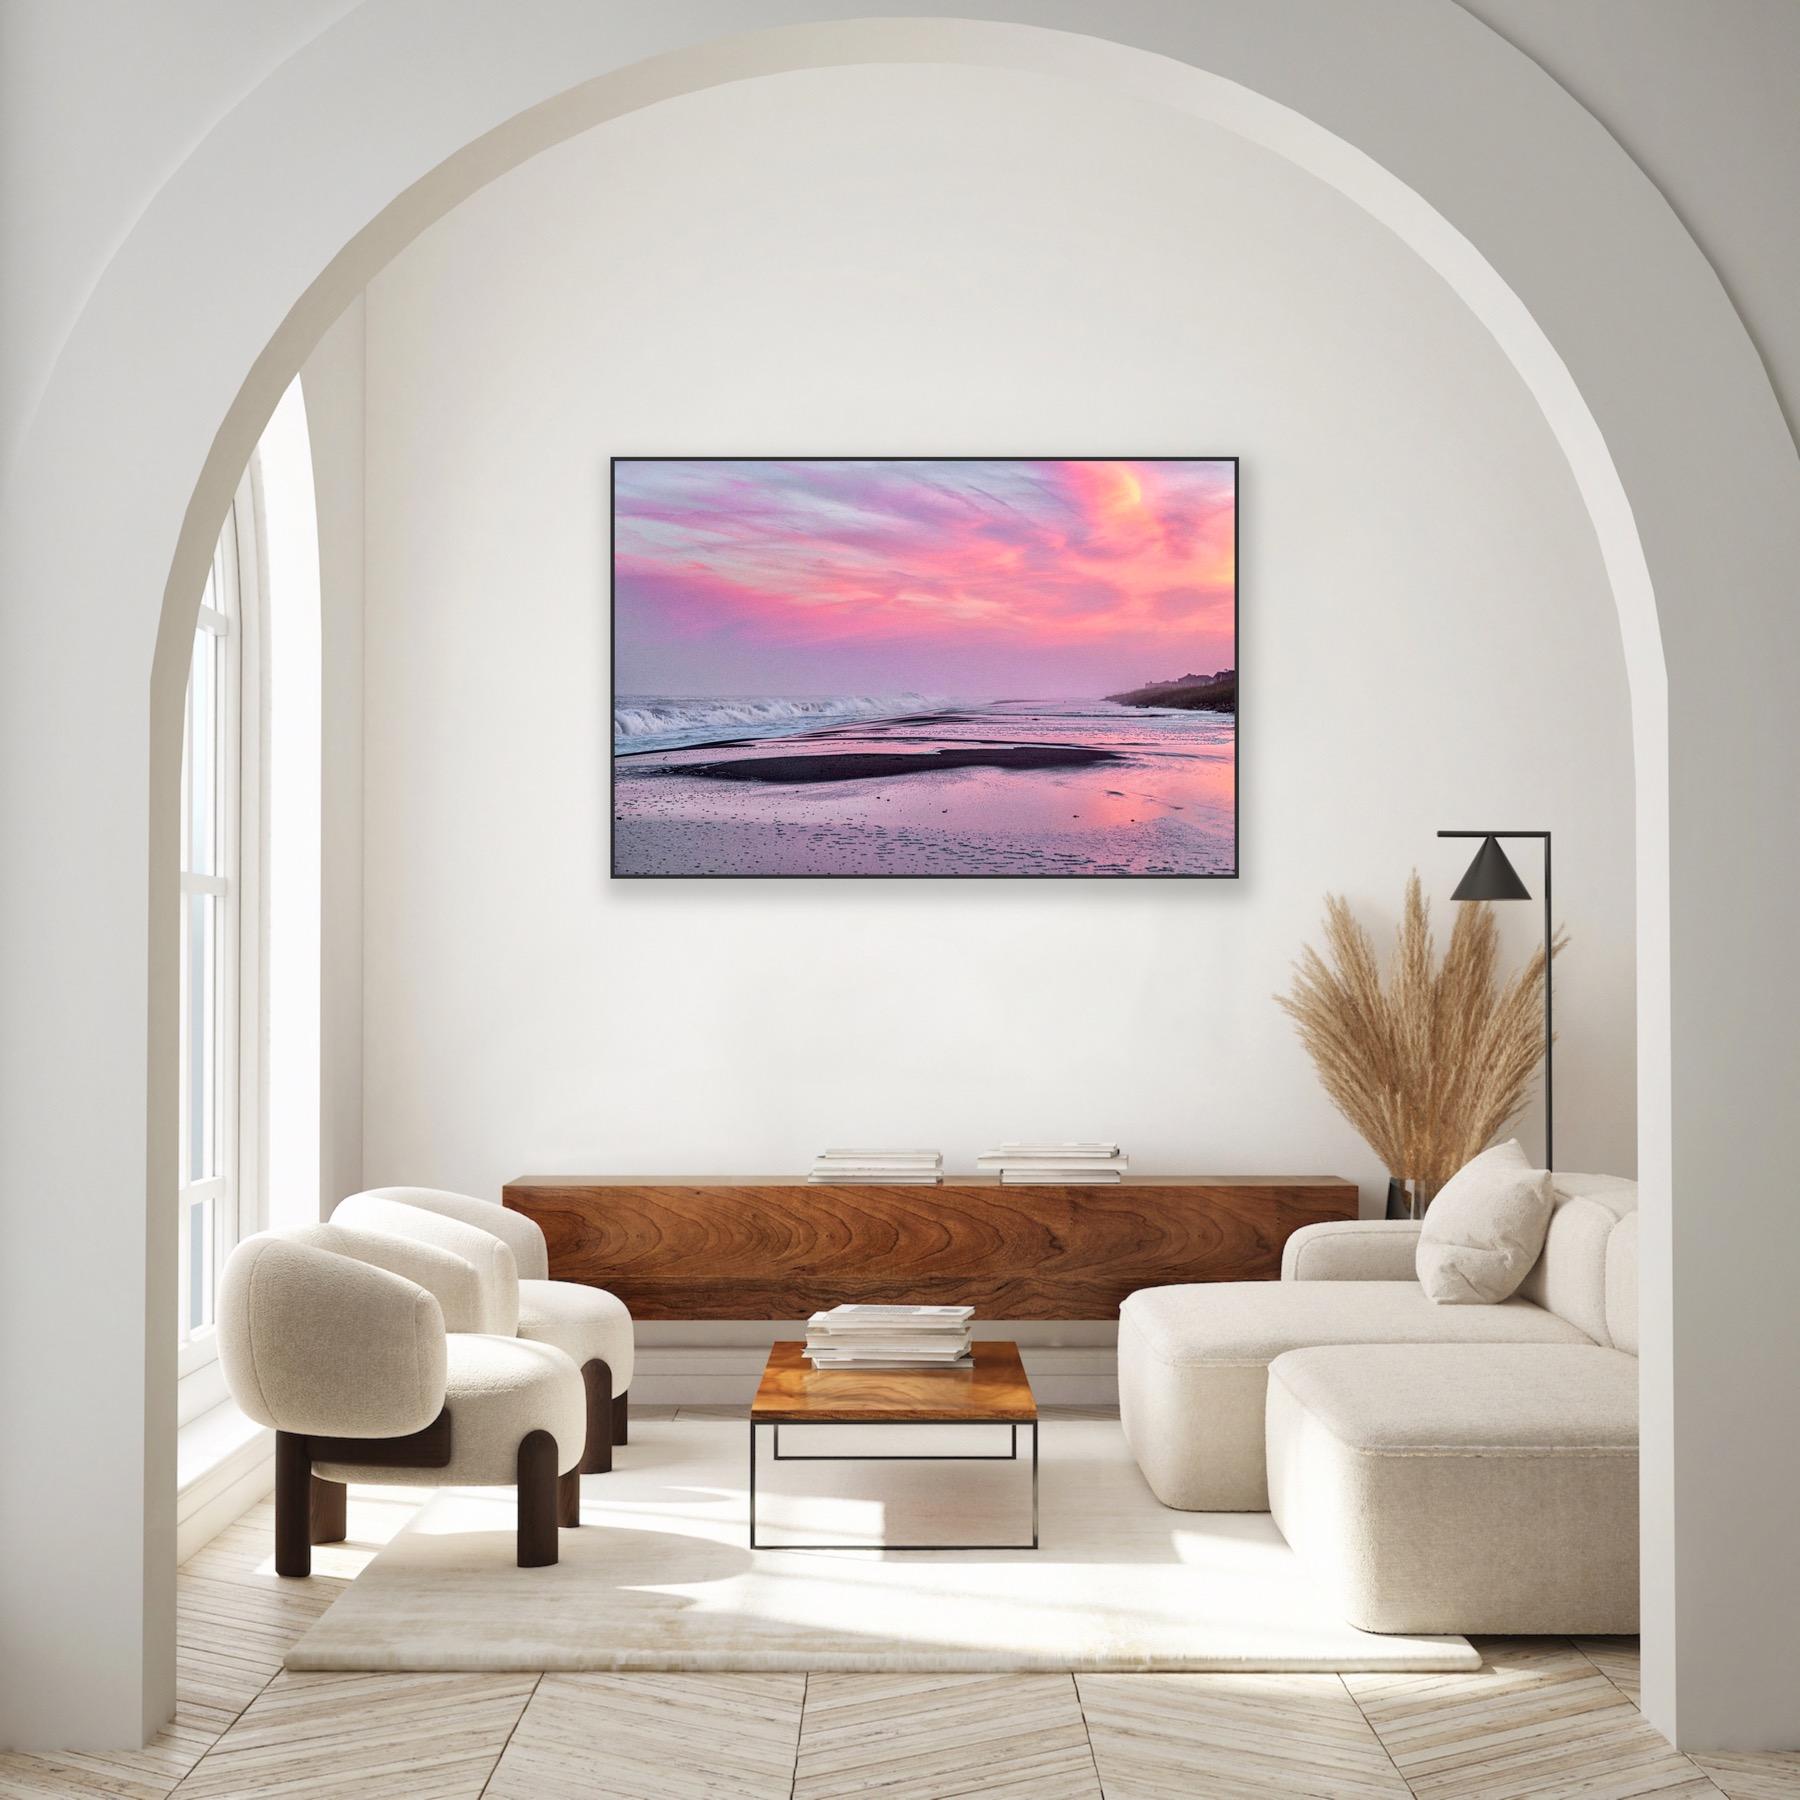 A distant hurricane combined with a full blue moon created a massive storm surge, contrasted by the peaceful early fall dusk. 

Printed on high quality fine art paper mounted on dibond aluminum, with a float mount backing.

Available in a wide